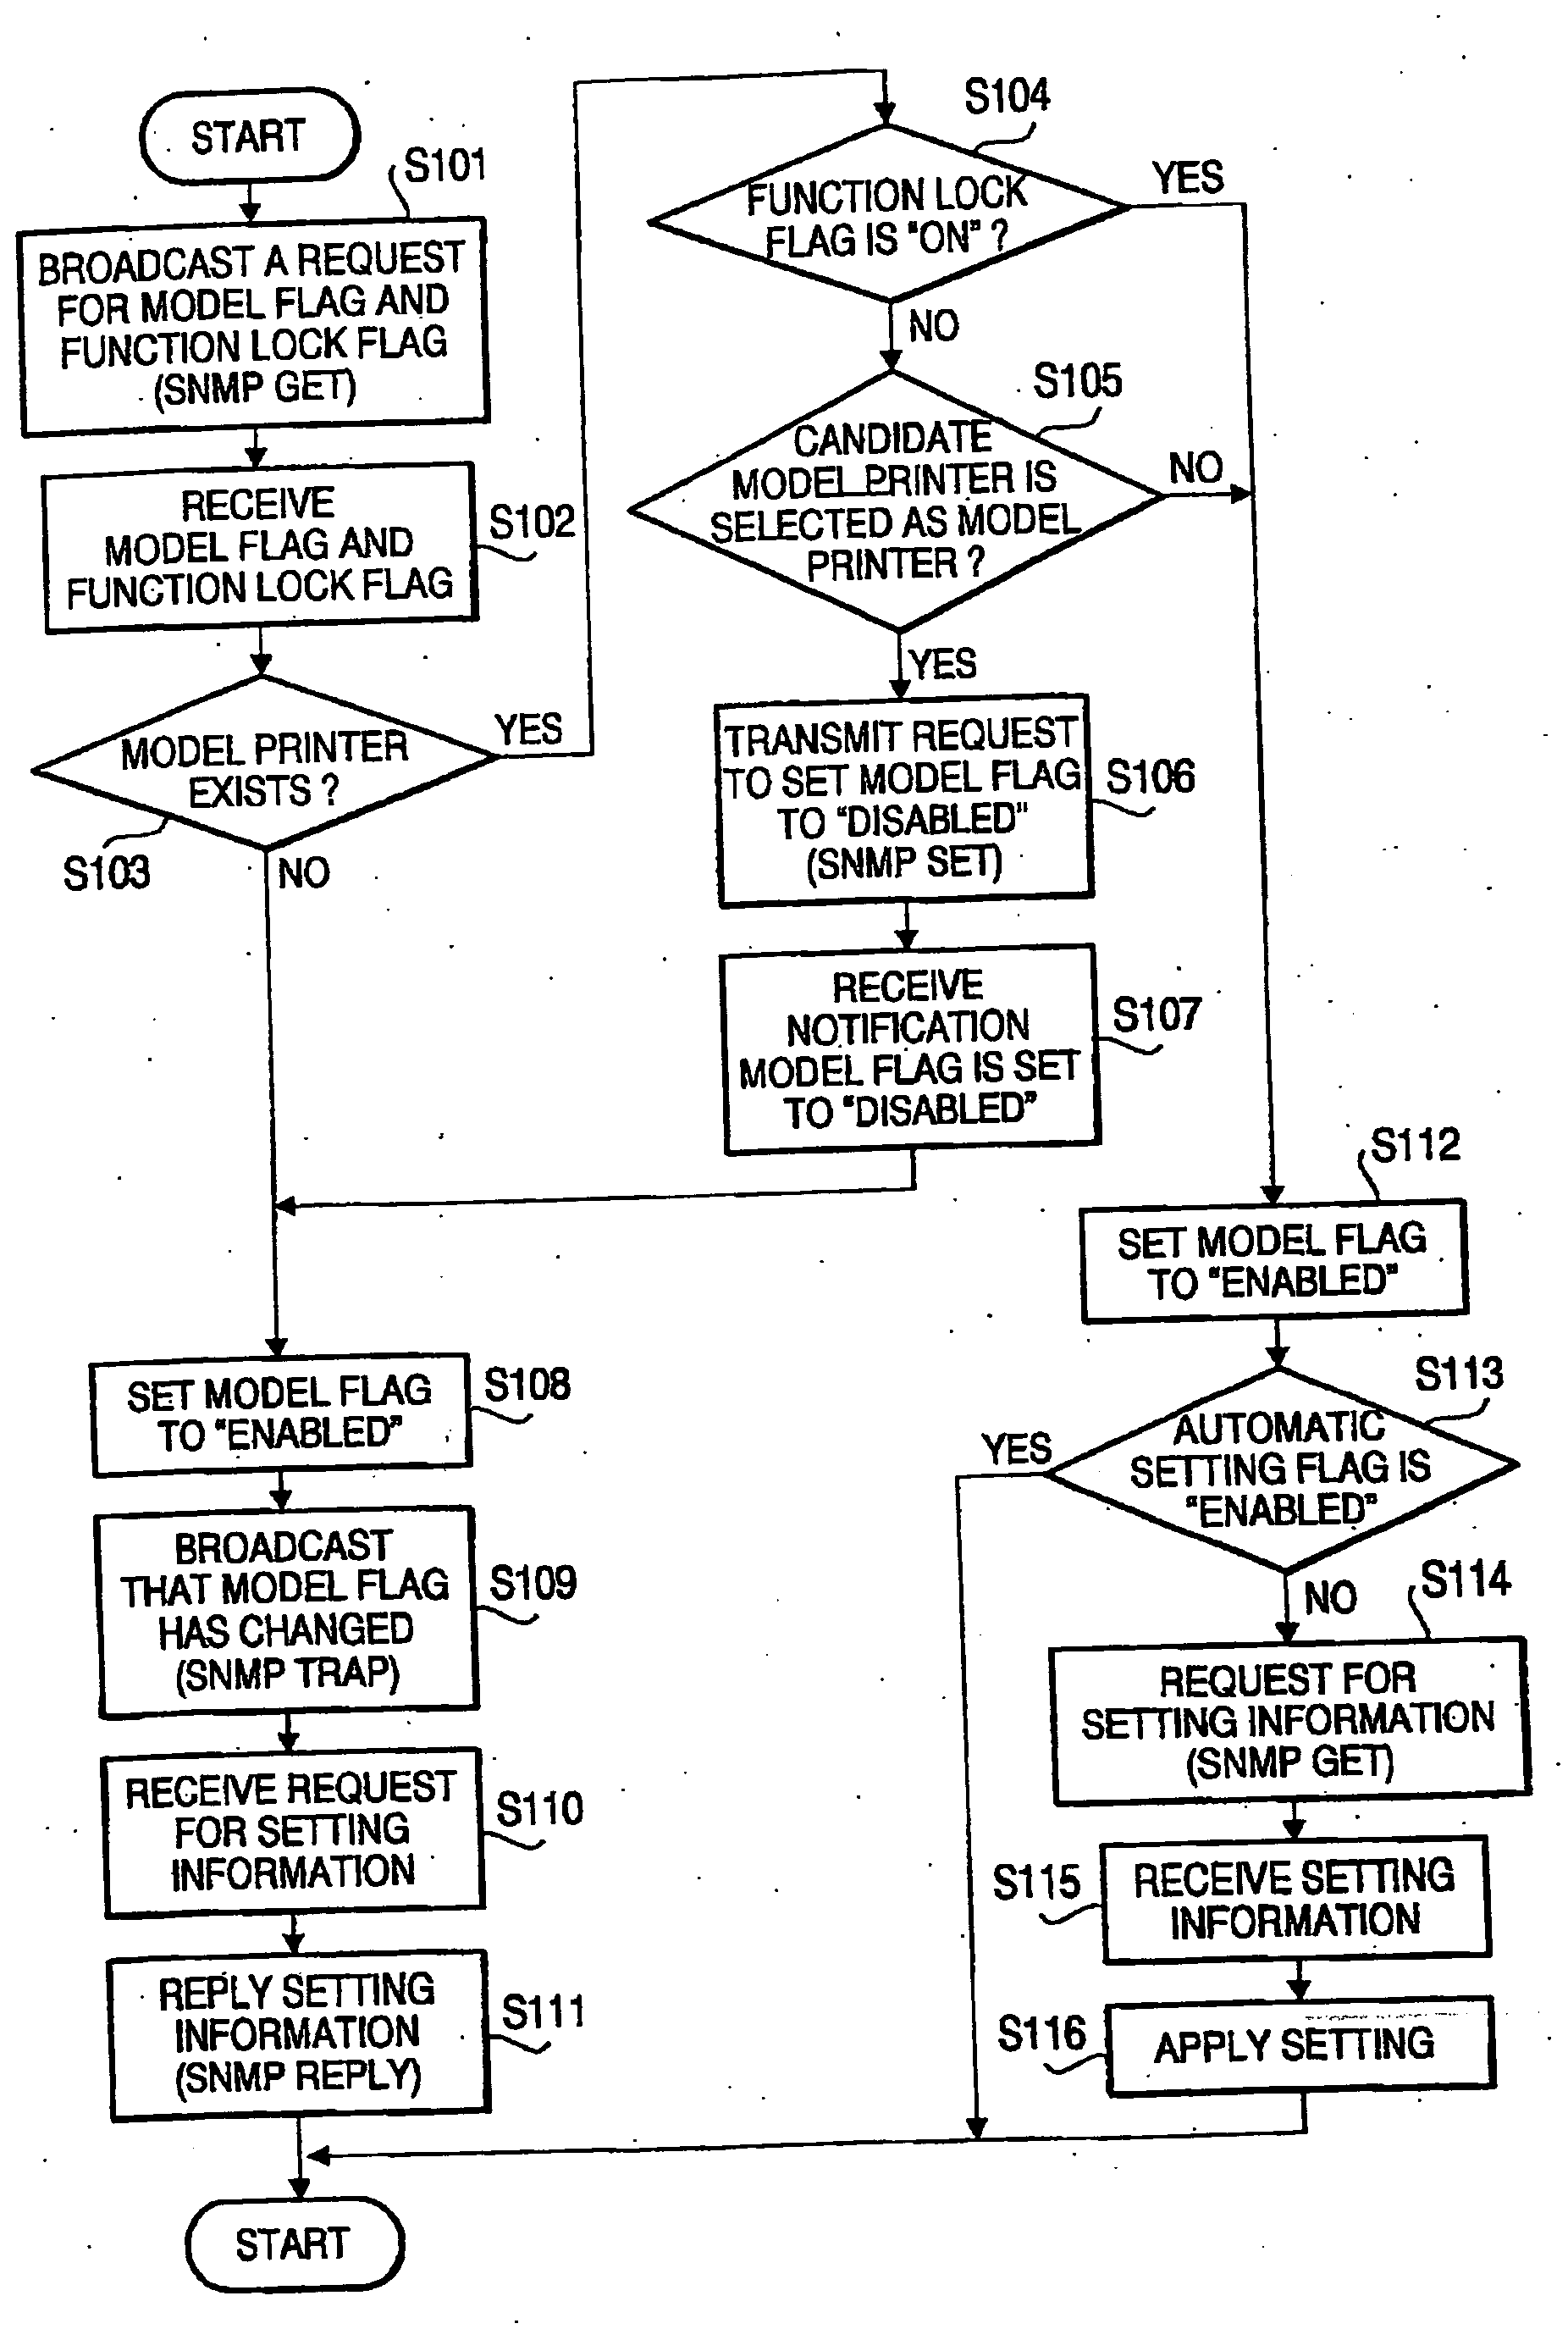 Configuration setting system for network system